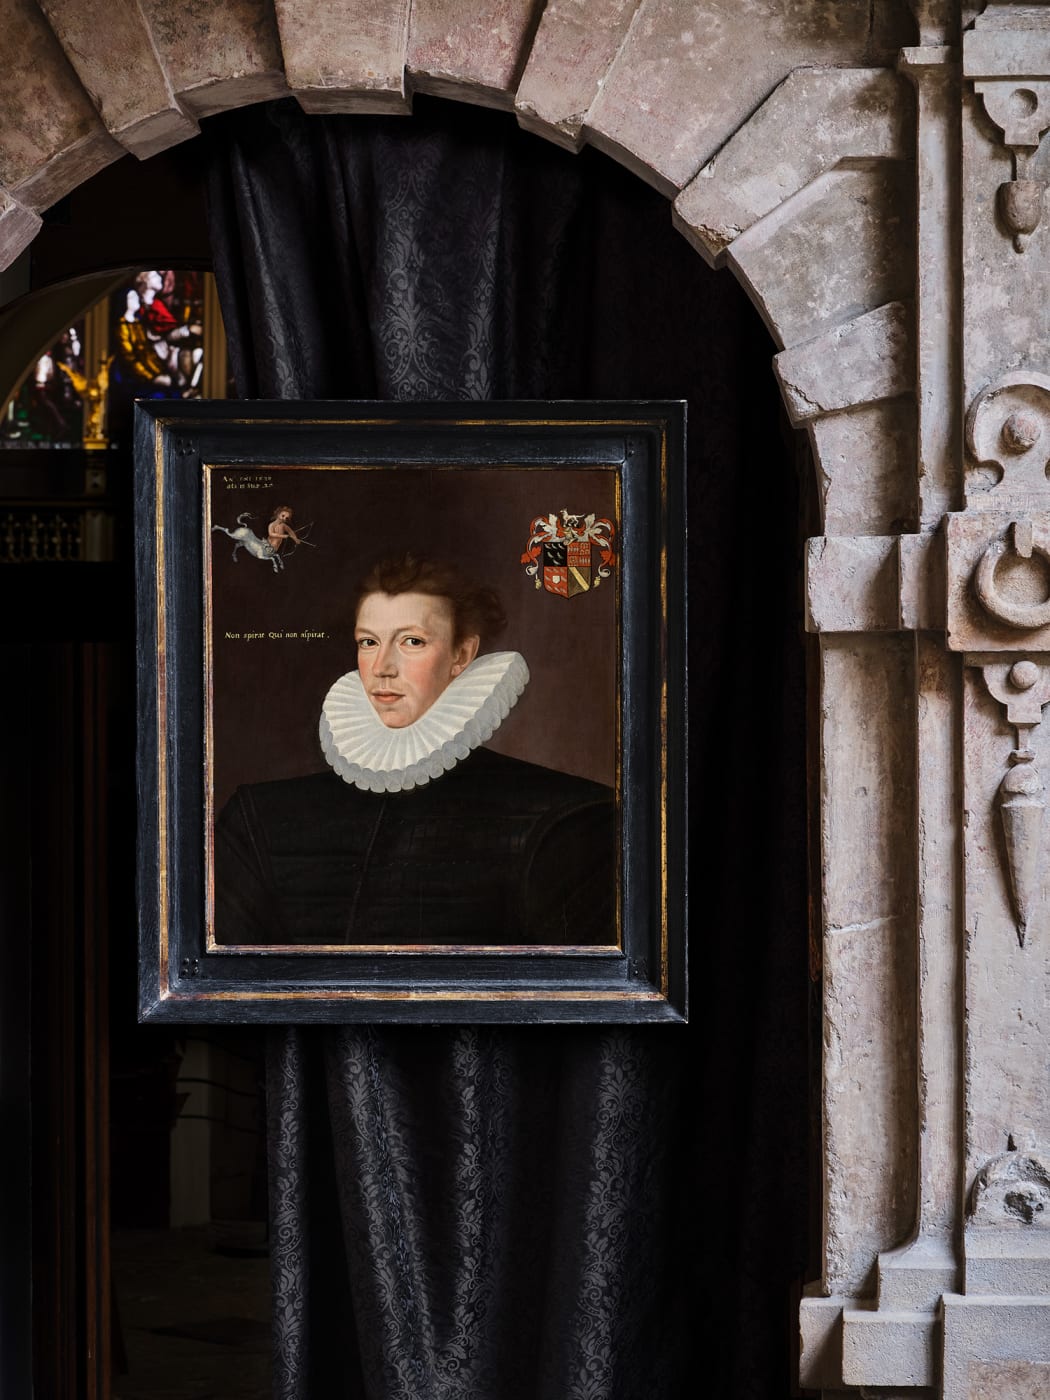 George Gower's Portrait of William Arundell hanging in a stone church interior